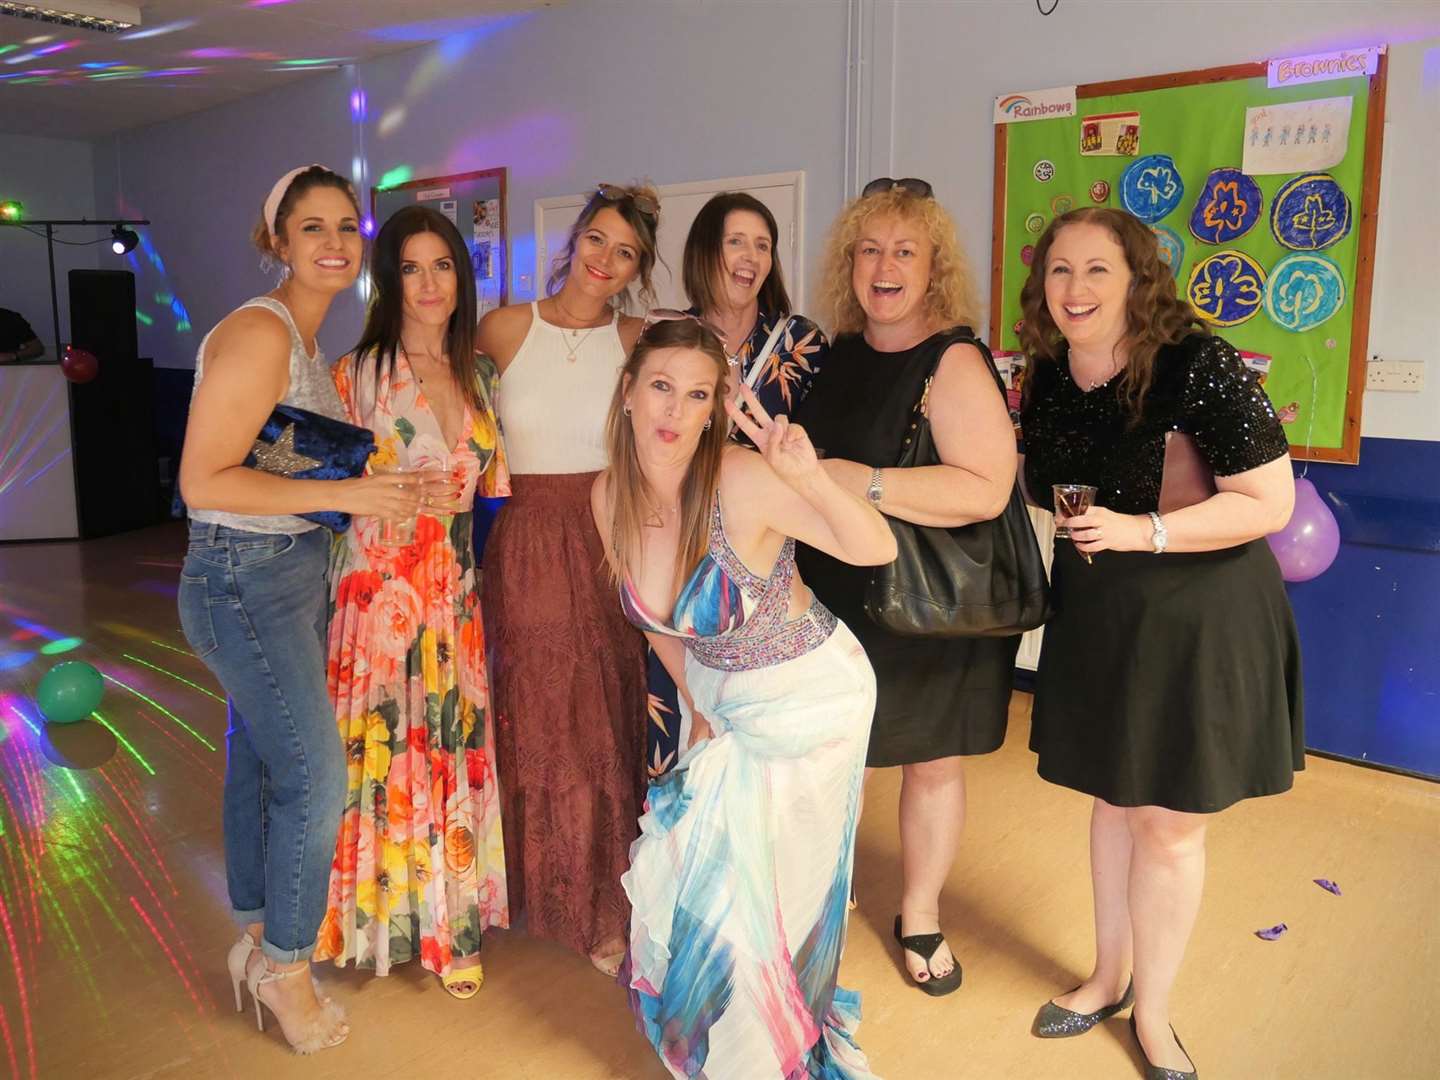 Beth Purvis on her 40th birthday, just two years ago, with friends, from left, Rachel Roberts, Madeleine Sanders, Lisa Menzella, Karen Tait, Darian Compton and Emma Stevens (48887736)